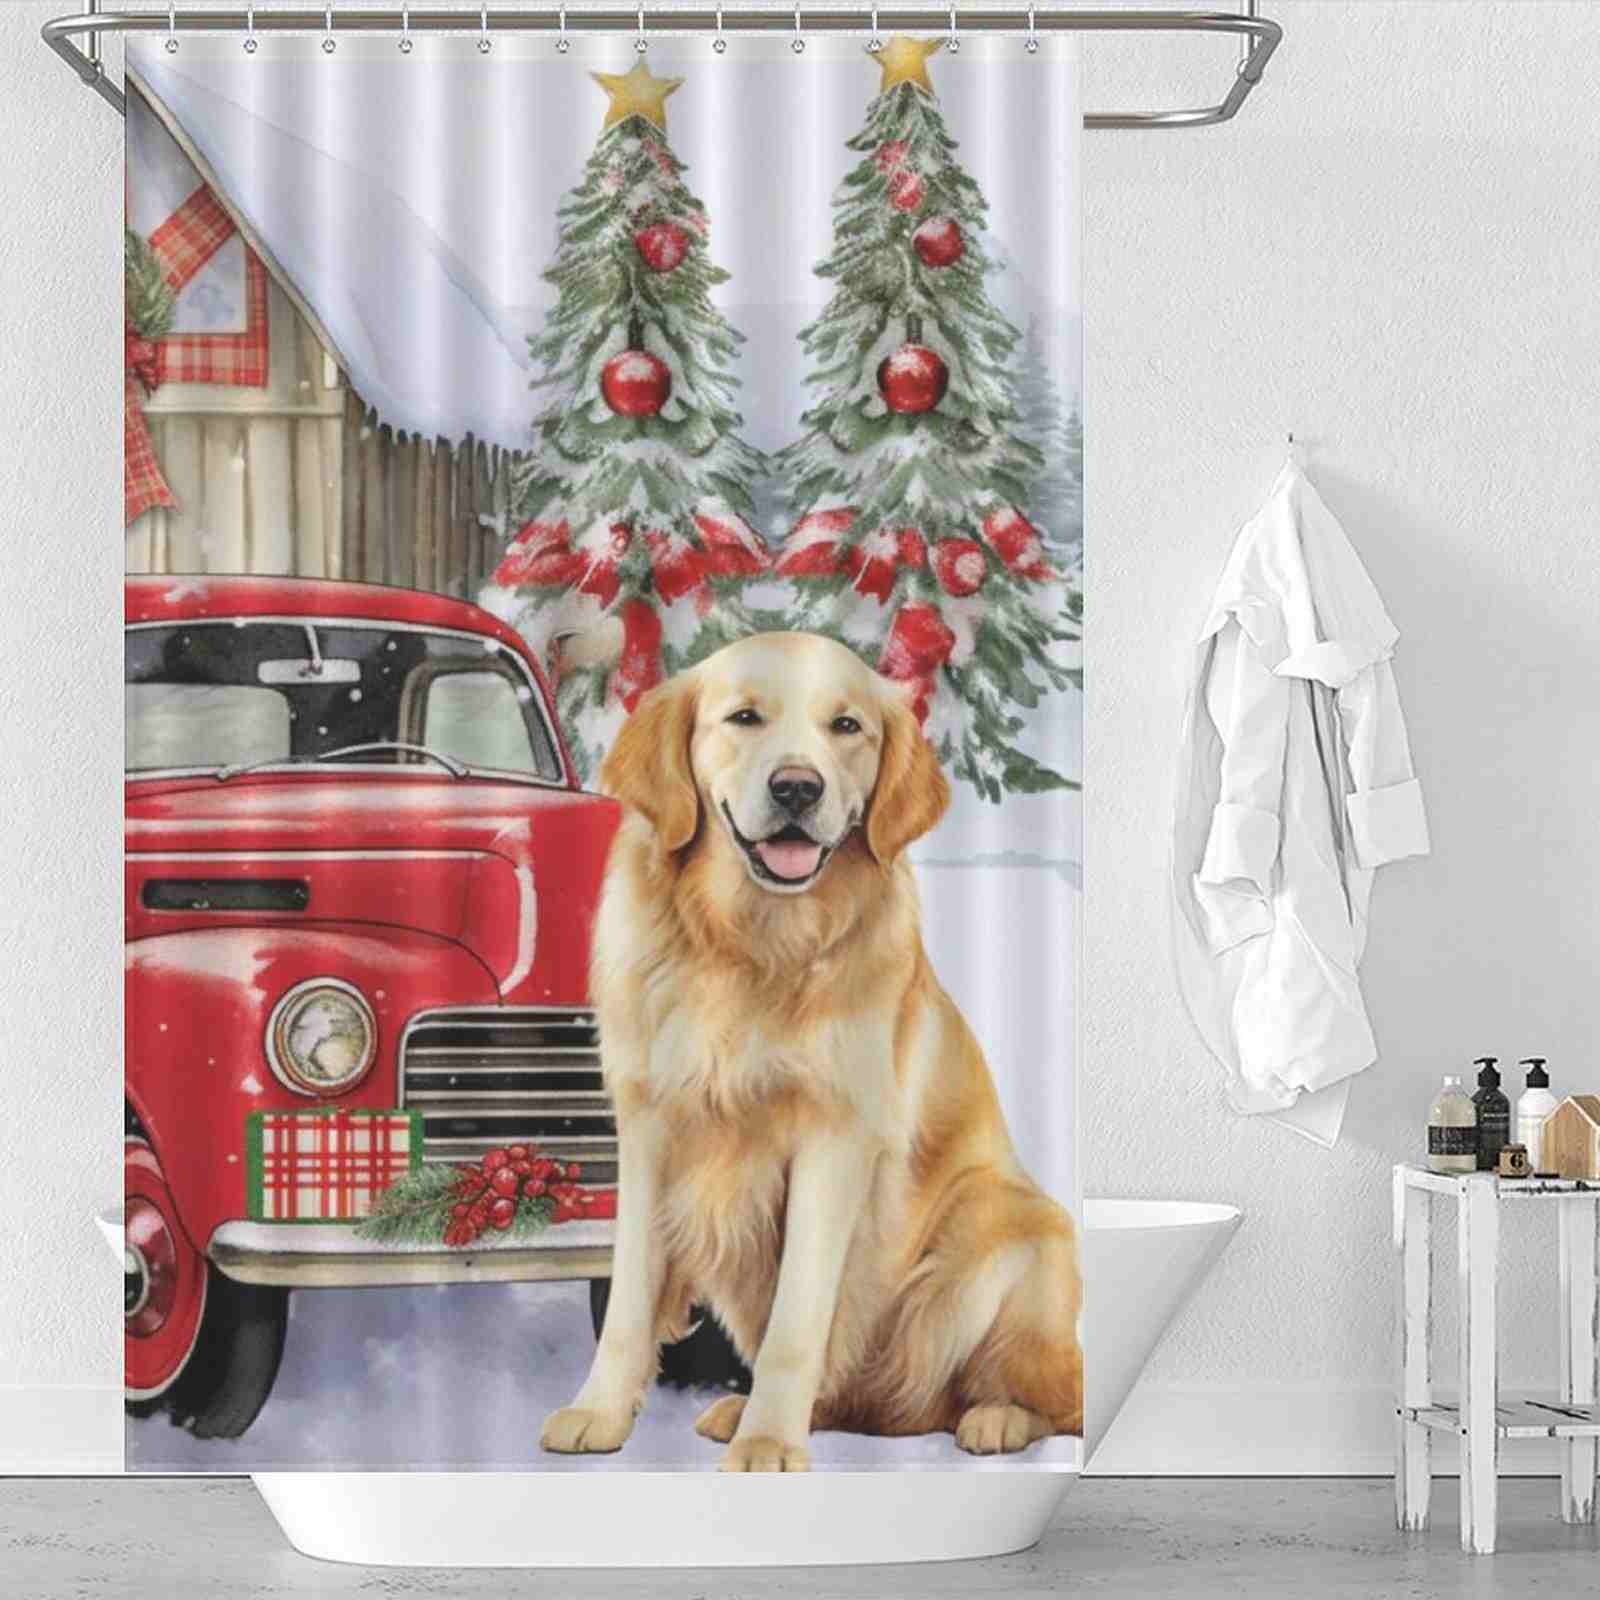 A shower curtain with a golden retriever and a red truck.